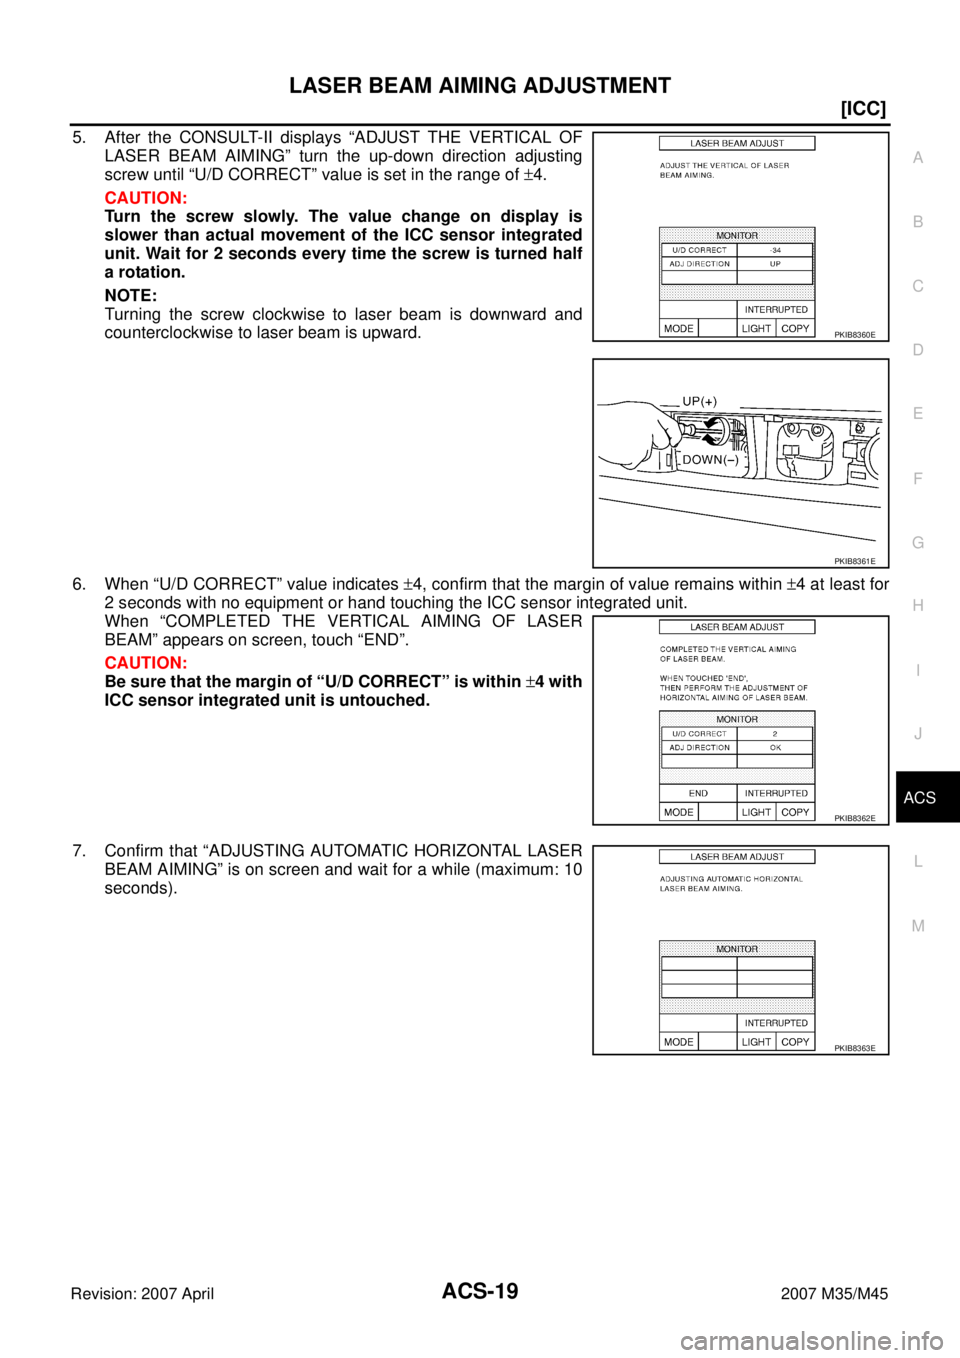 INFINITI M35 2007  Factory Service Manual LASER BEAM AIMING ADJUSTMENT
ACS-19
[ICC]
C
D
E
F
G
H
I
J
L
MA
B
ACS
Revision: 2007 April2007 M35/M45
5. After the CONSULT-II displays “ADJUST THE VERTICAL OF
LASER BEAM AIMING” turn the up-down d